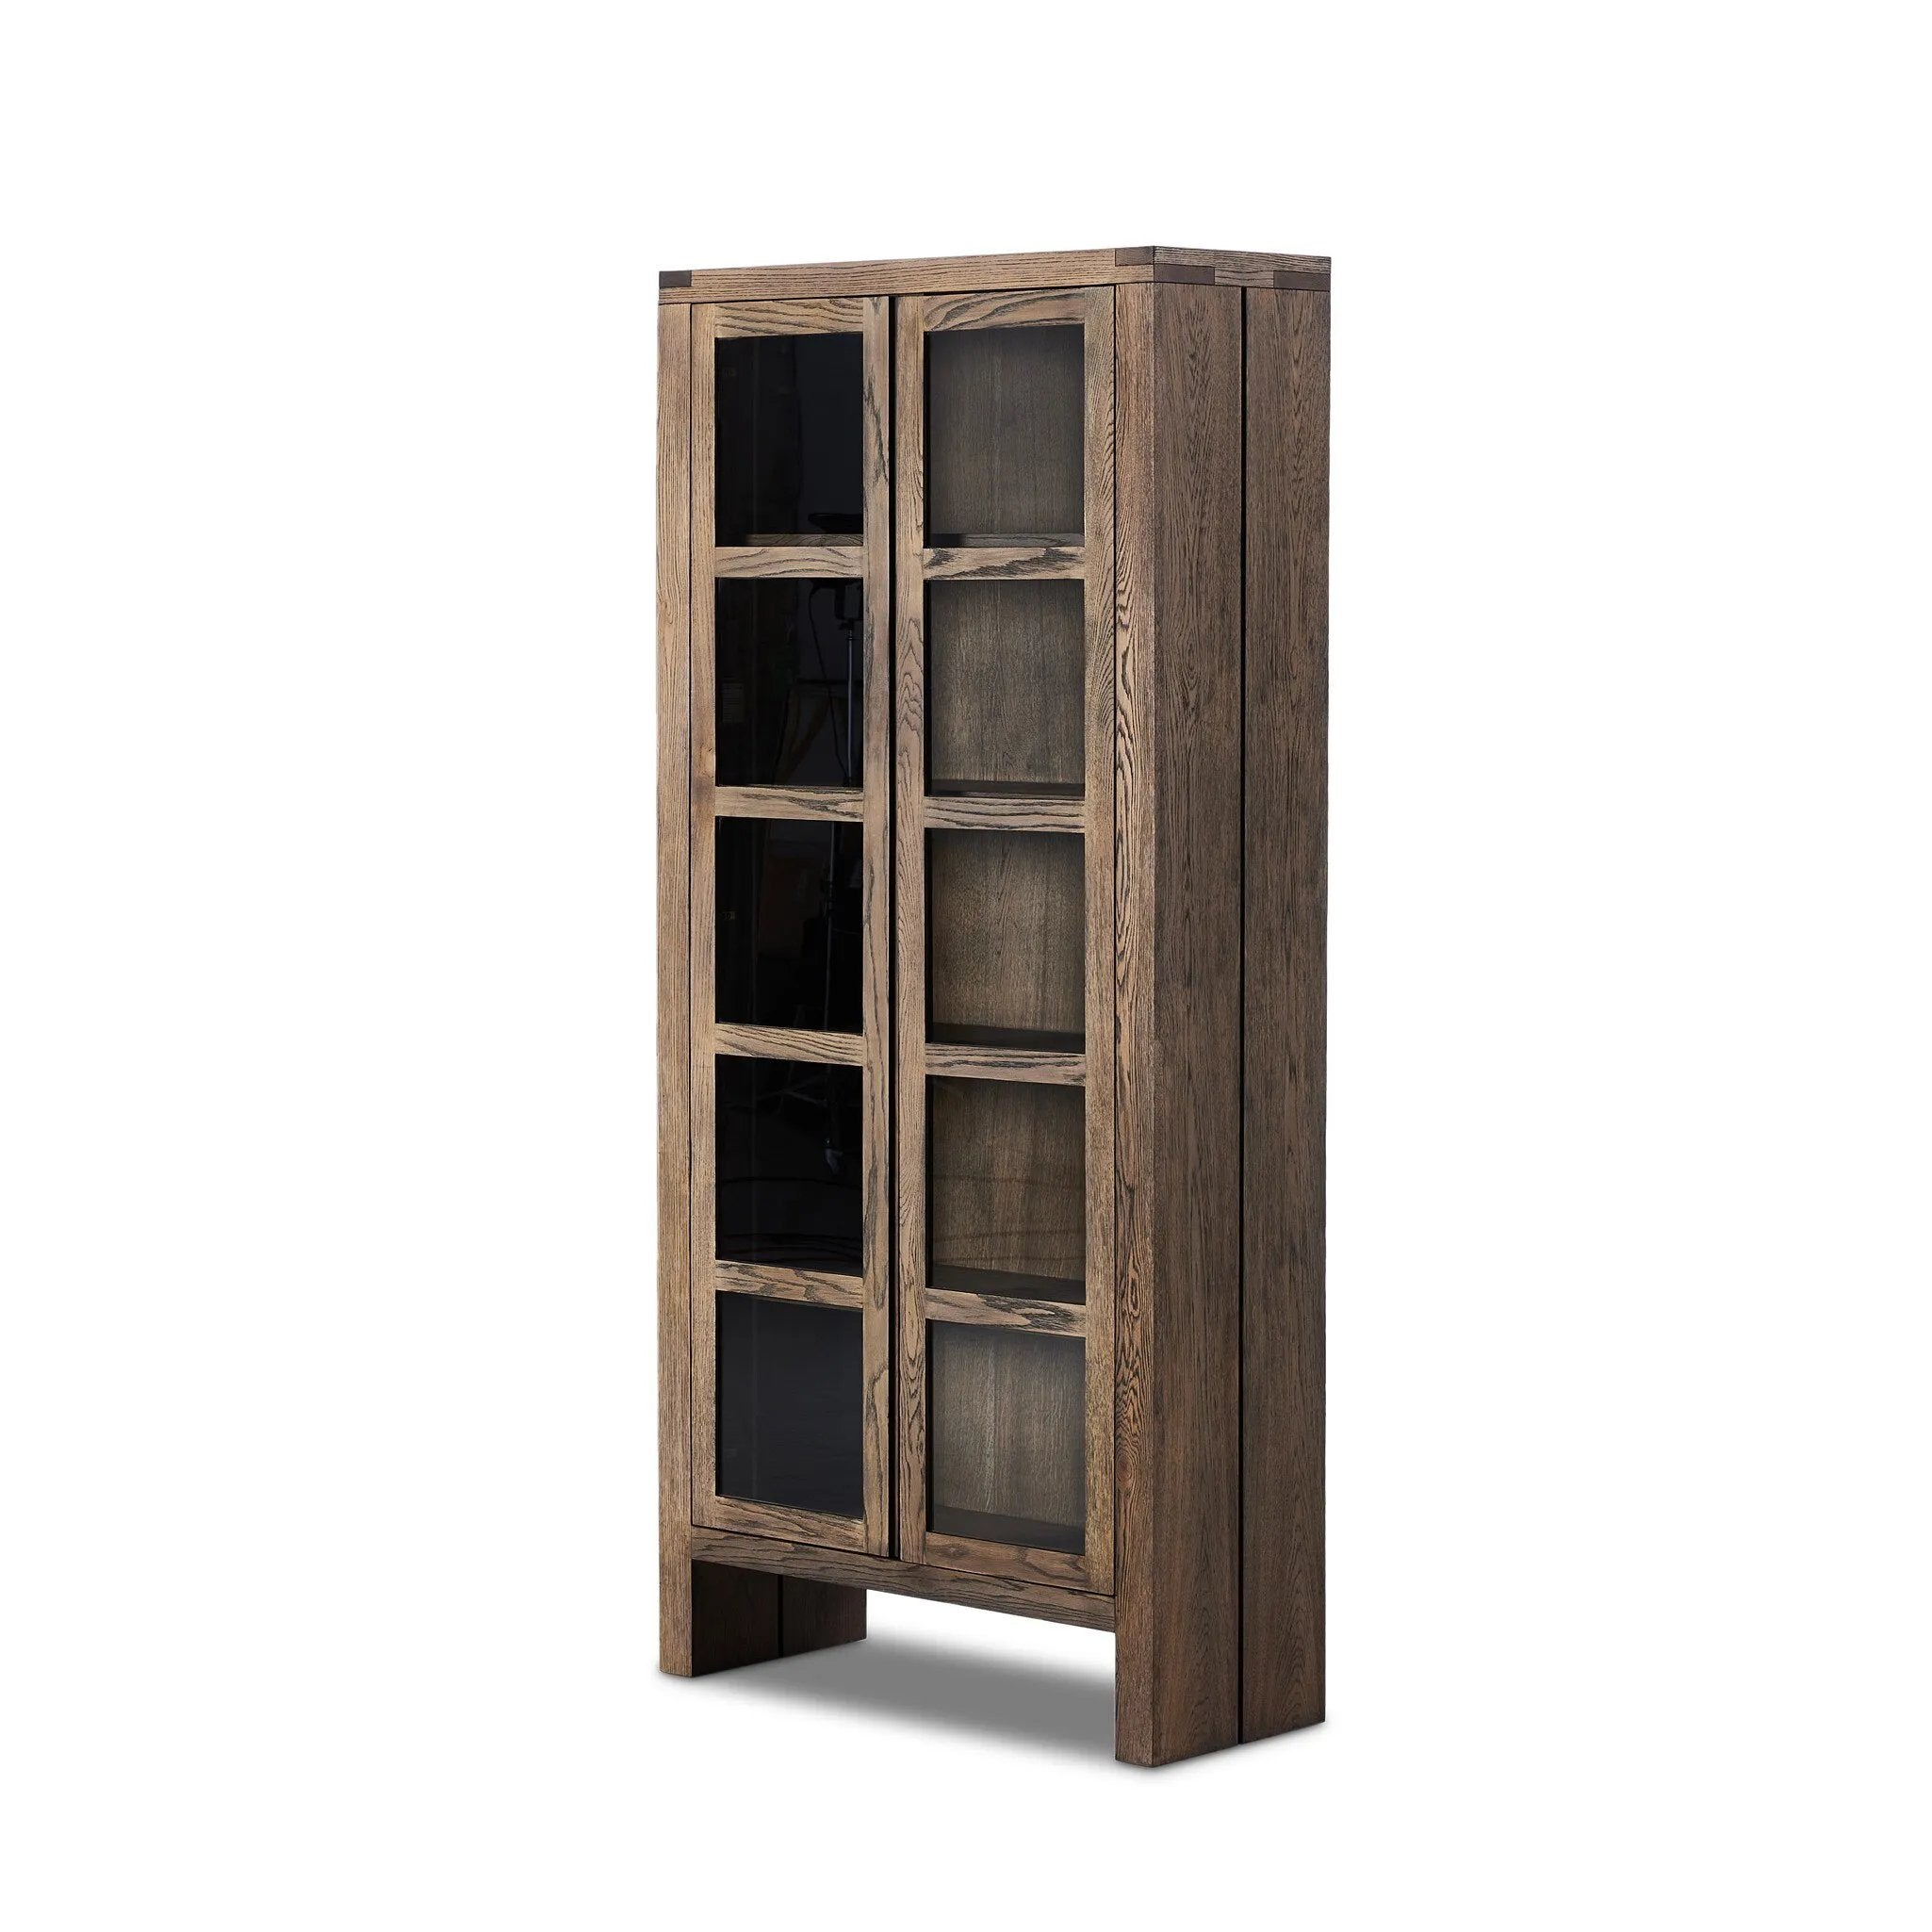 This minimal-inspired bookcase is crafted from a mix of solid oak and worn oak veneer. Featuring glass-front doors and spacious shelves for storage and display.Collection: Bennet Amethyst Home provides interior design, new home construction design consulting, vintage area rugs, and lighting in the Calabasas metro area.